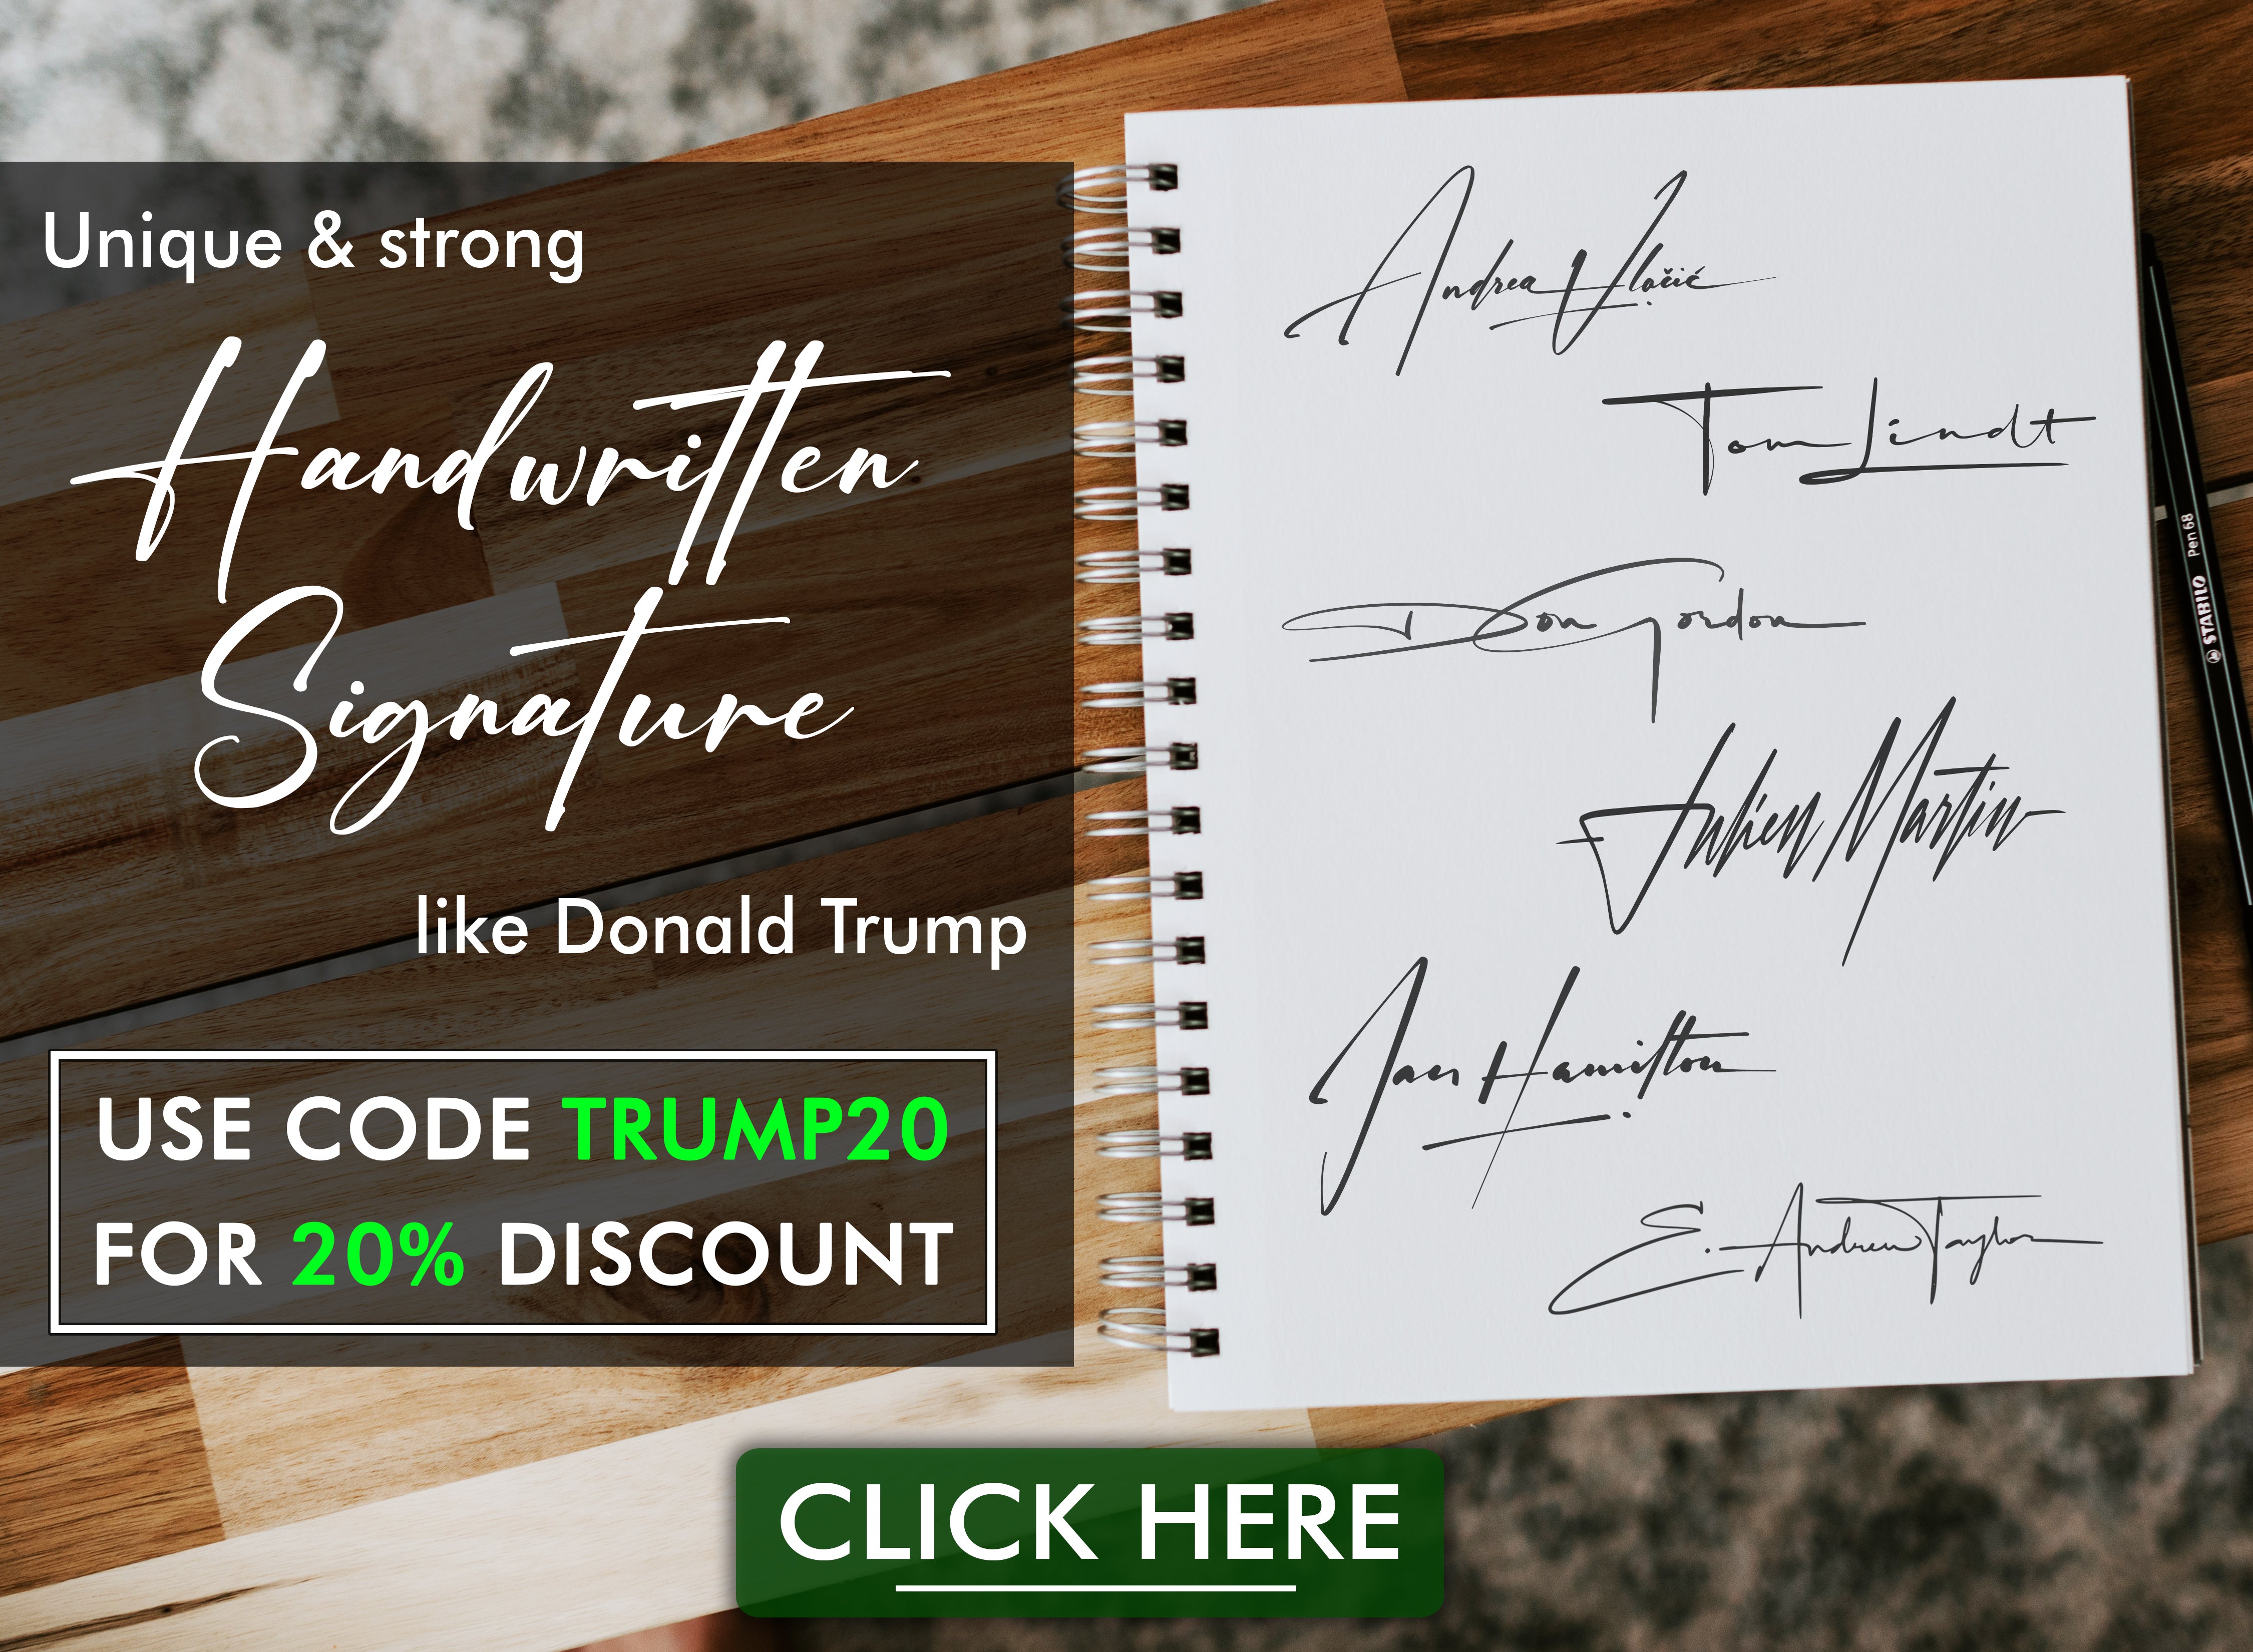 Discover the story behind Donald Trump's signature and how it reflects his personality and brand. Click here and read more on Artlogo blog.